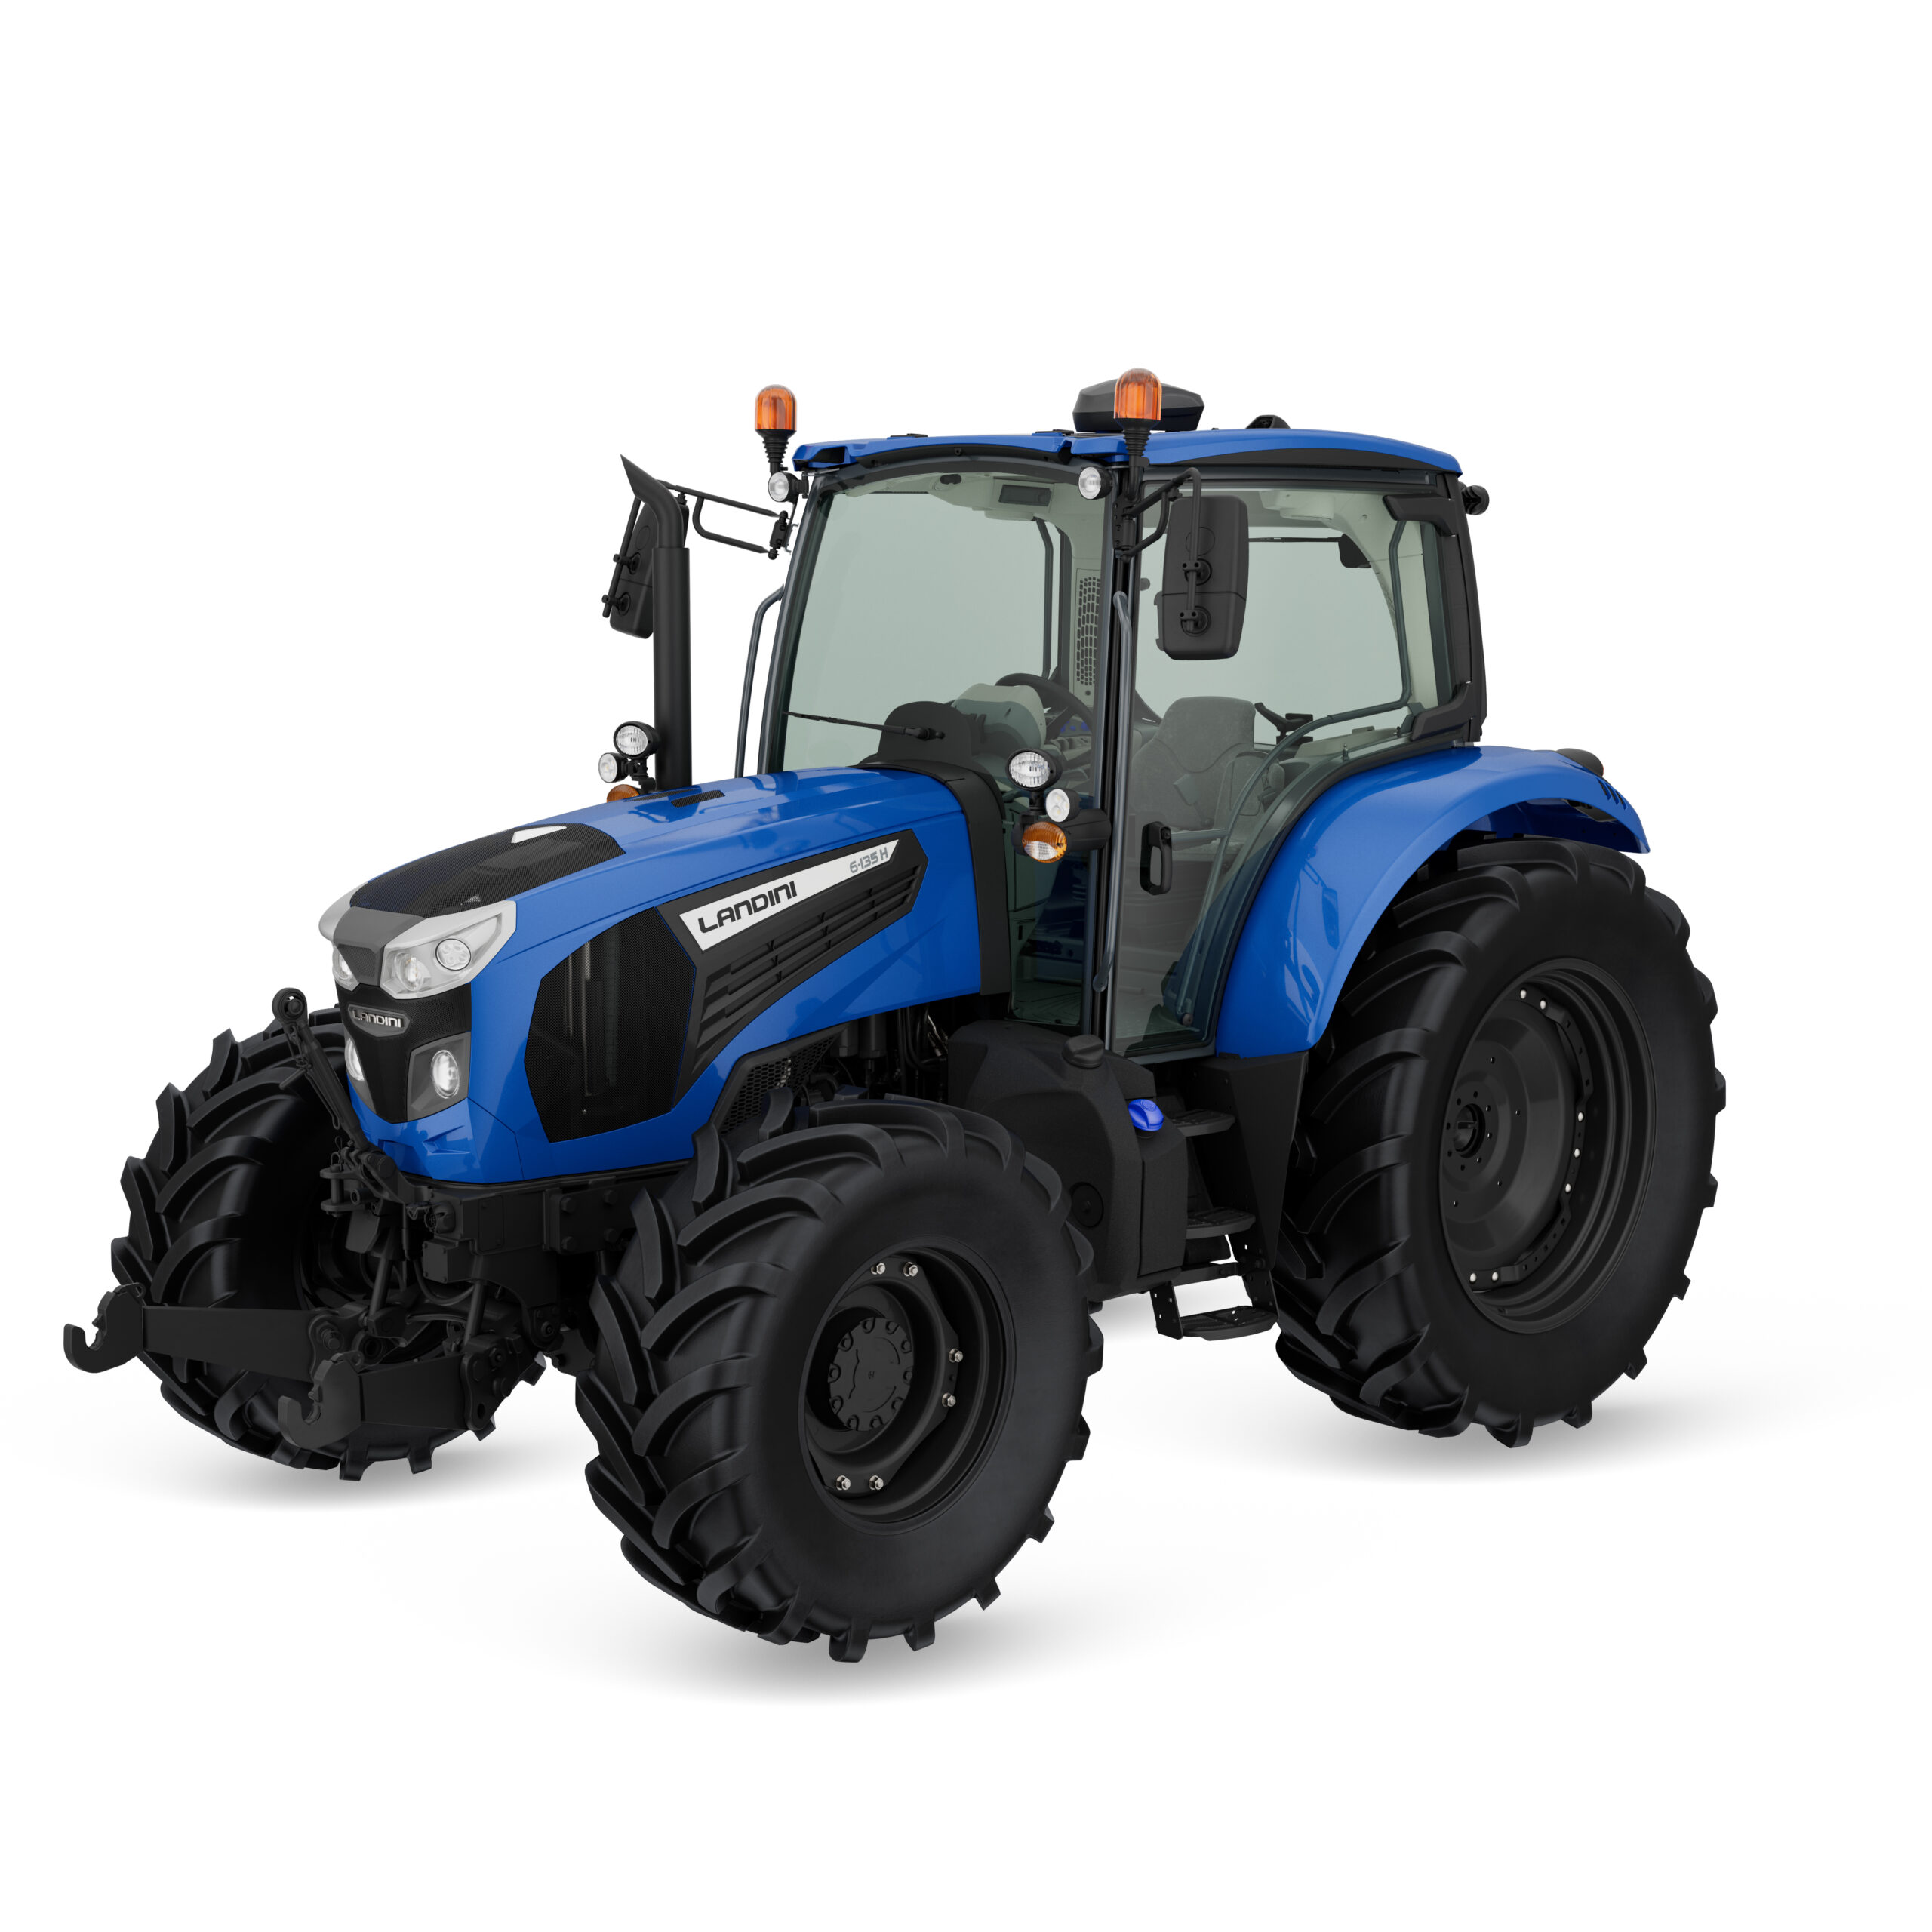 Landini 6H Series: style and power of the new 130hp utility